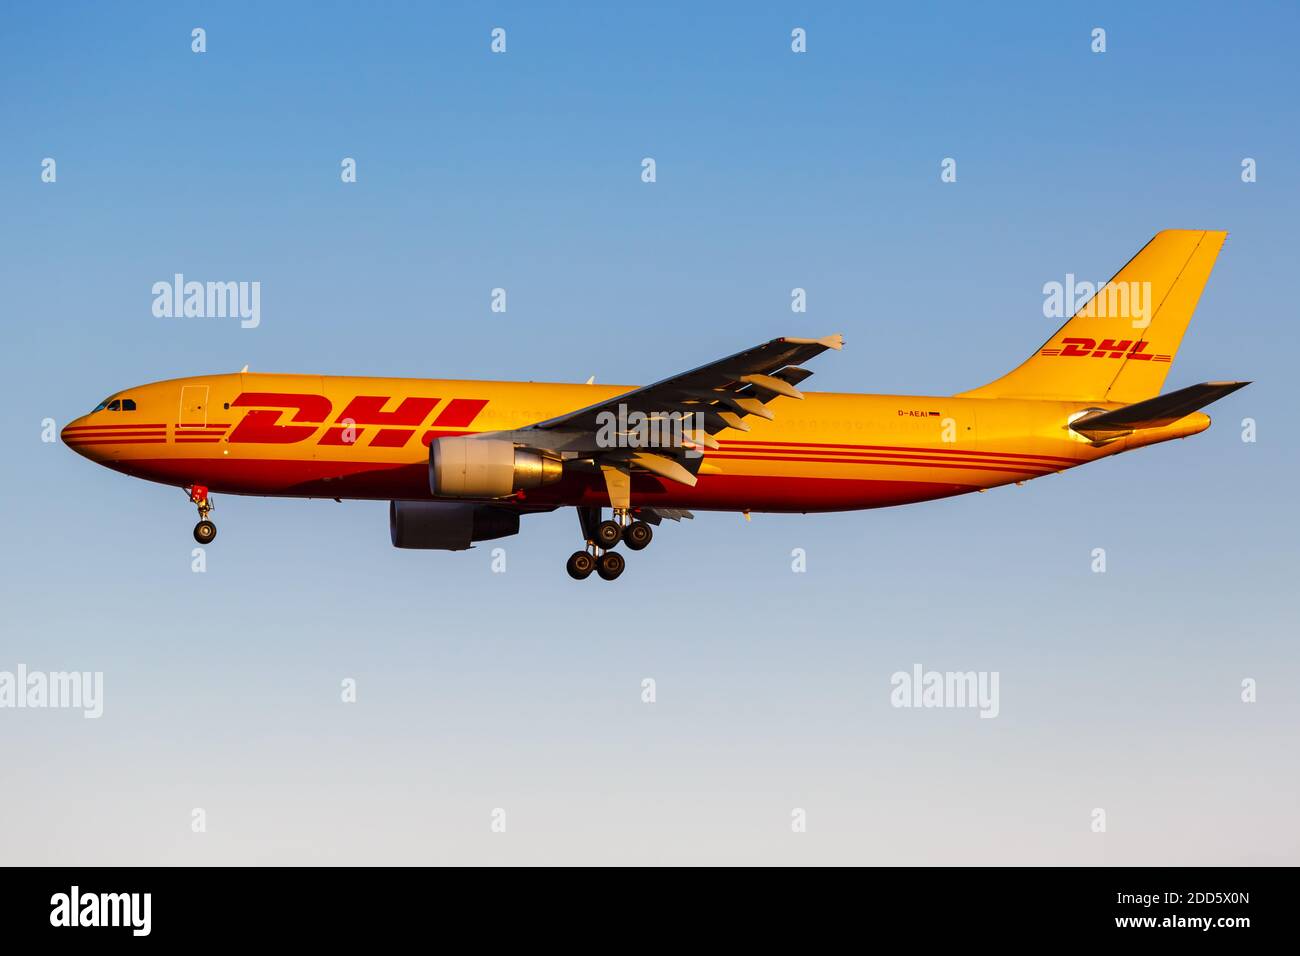 Athens, Greece - September 21, 2020: DHL European Air Transport Airbus A300-600F airplane Athens Airport in Greece. Airbus is a European aircraft manu Stock Photo